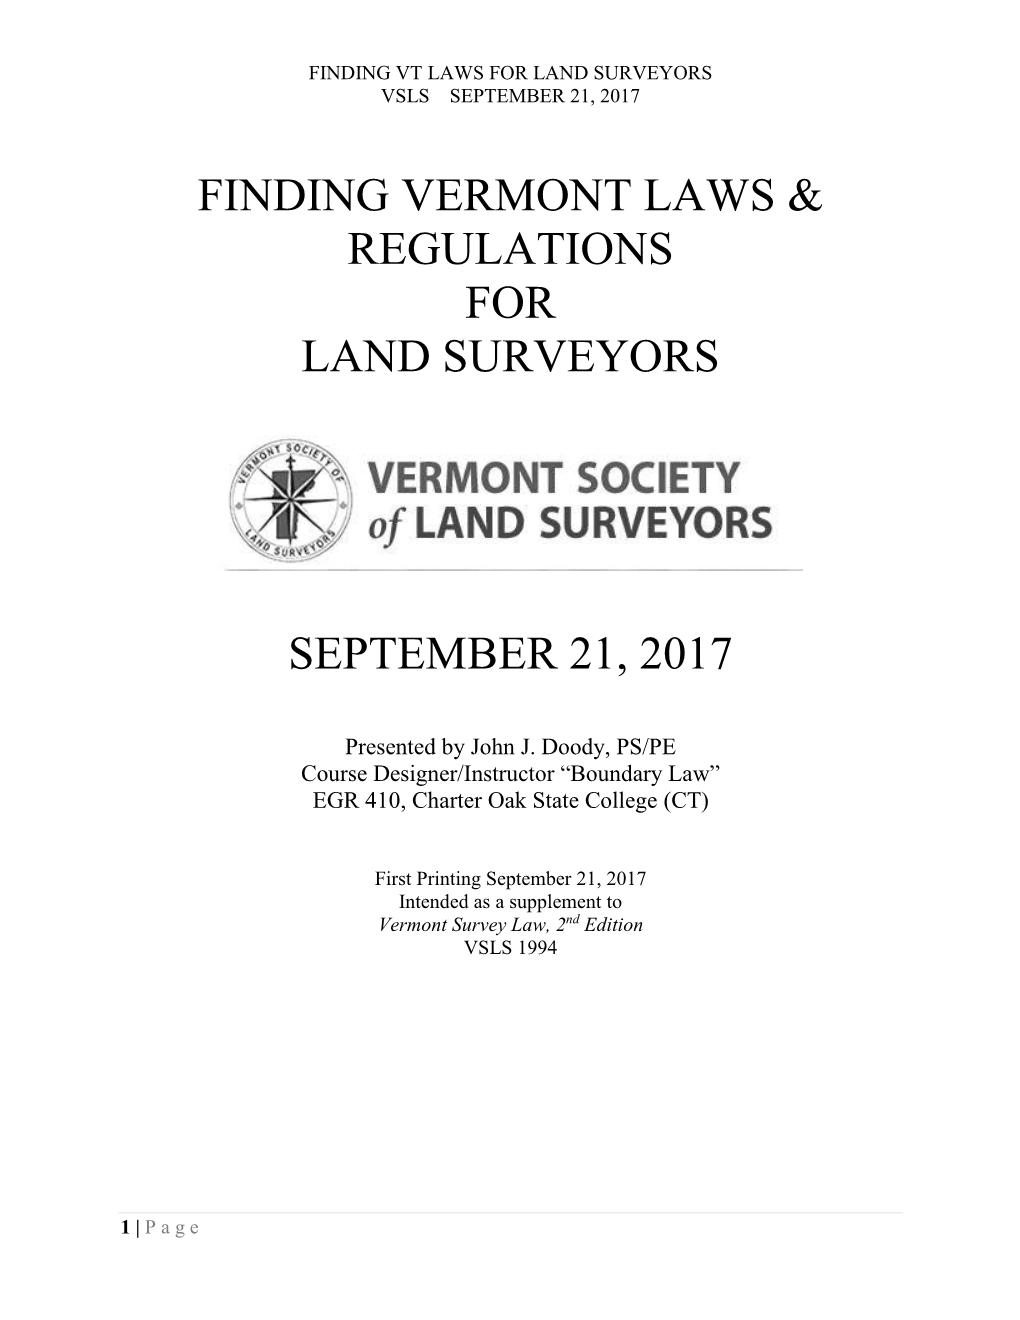 Finding Vermont Laws & Regulations for Land Surveyors